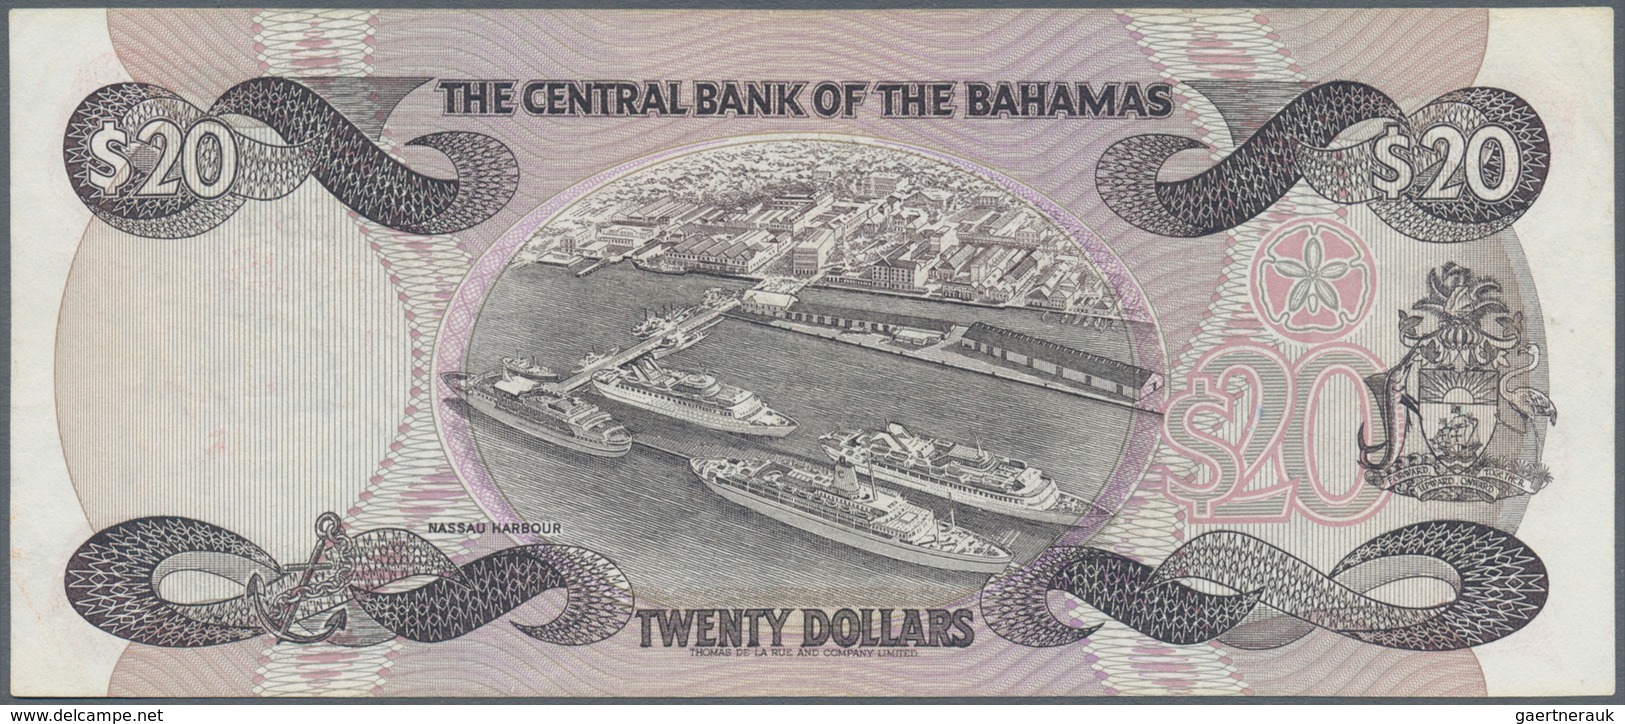 01099 Bahamas: 20 Dollars 1974 P. 47a, Pressed, Still Nice Colors, Condition: VF, Optically Appears Better - Bahamas